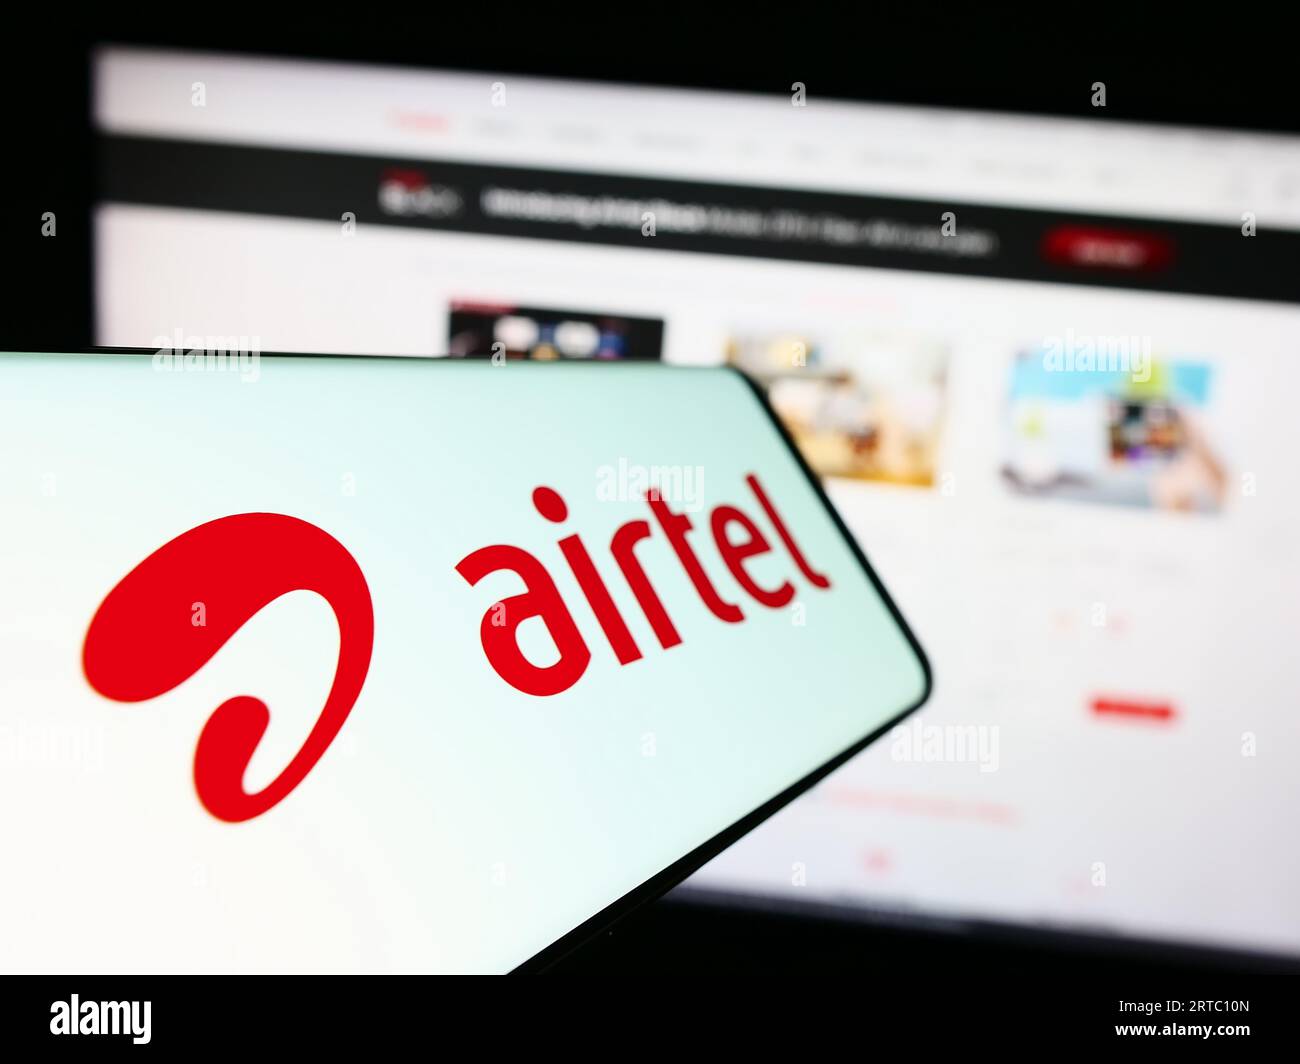 Smartphone with logo of telecommunications company Bharti Airtel Limited on screen in front of website. Focus on center-left of phone display. Stock Photo